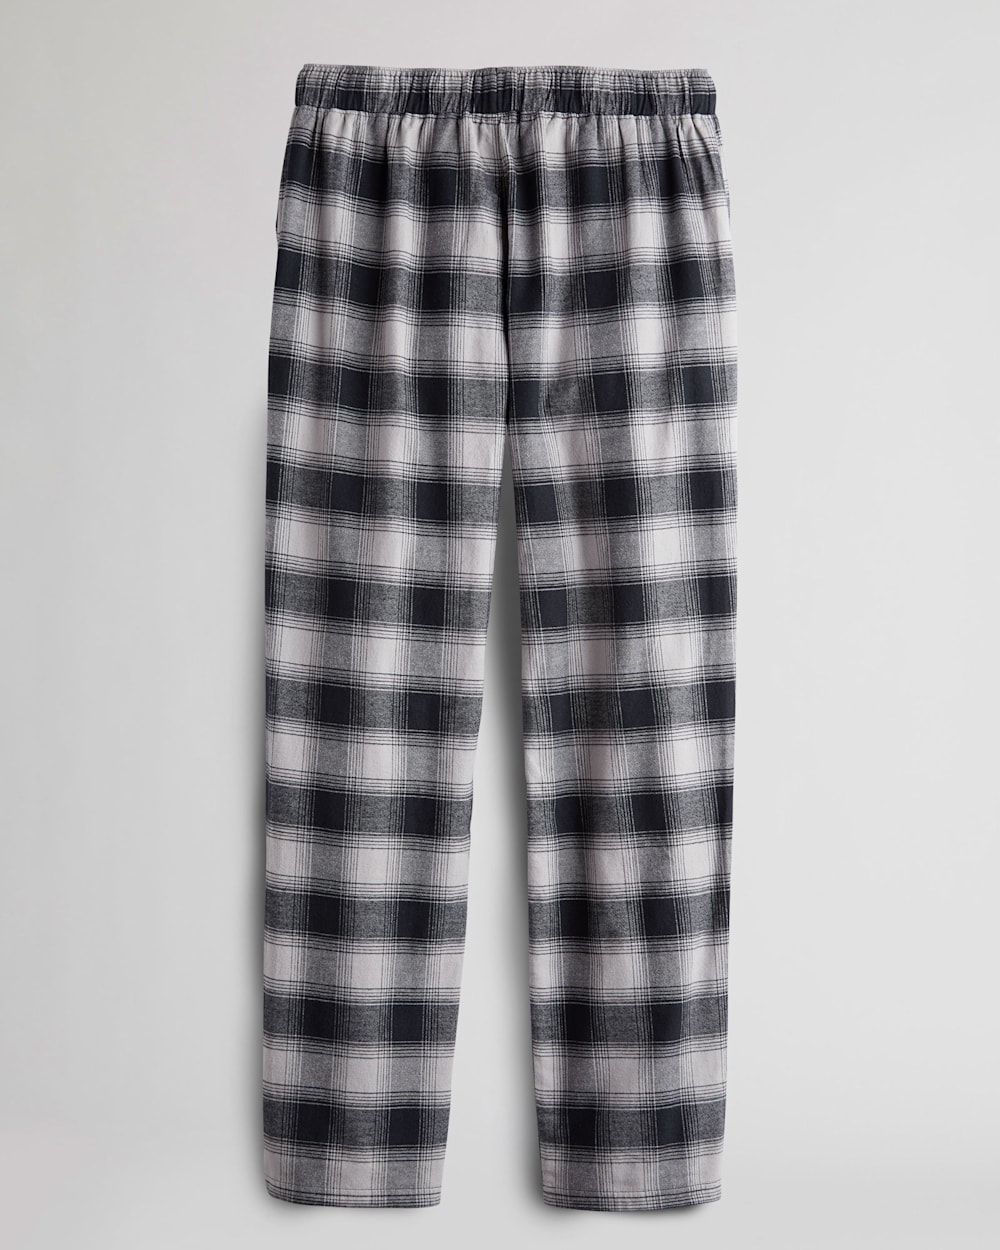 ALTERNATE VIEW OF MEN'S FLANNEL PAJAMA PANTS IN GREY/BLACK OMBRE image number 2